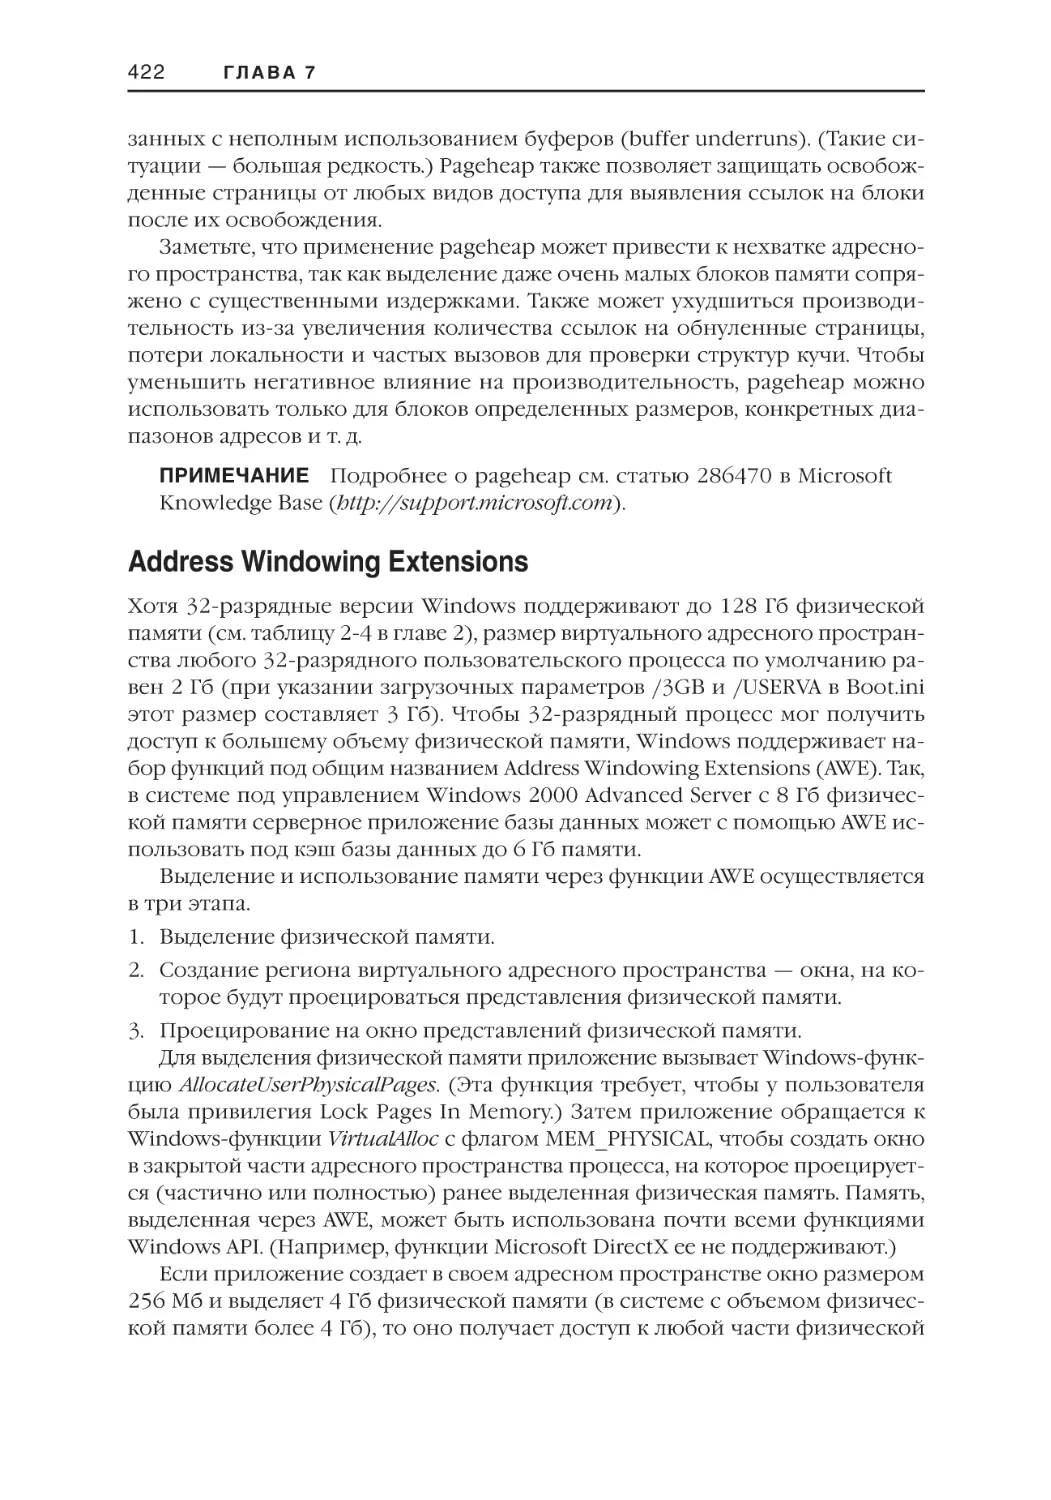 Address Windowing Extensions